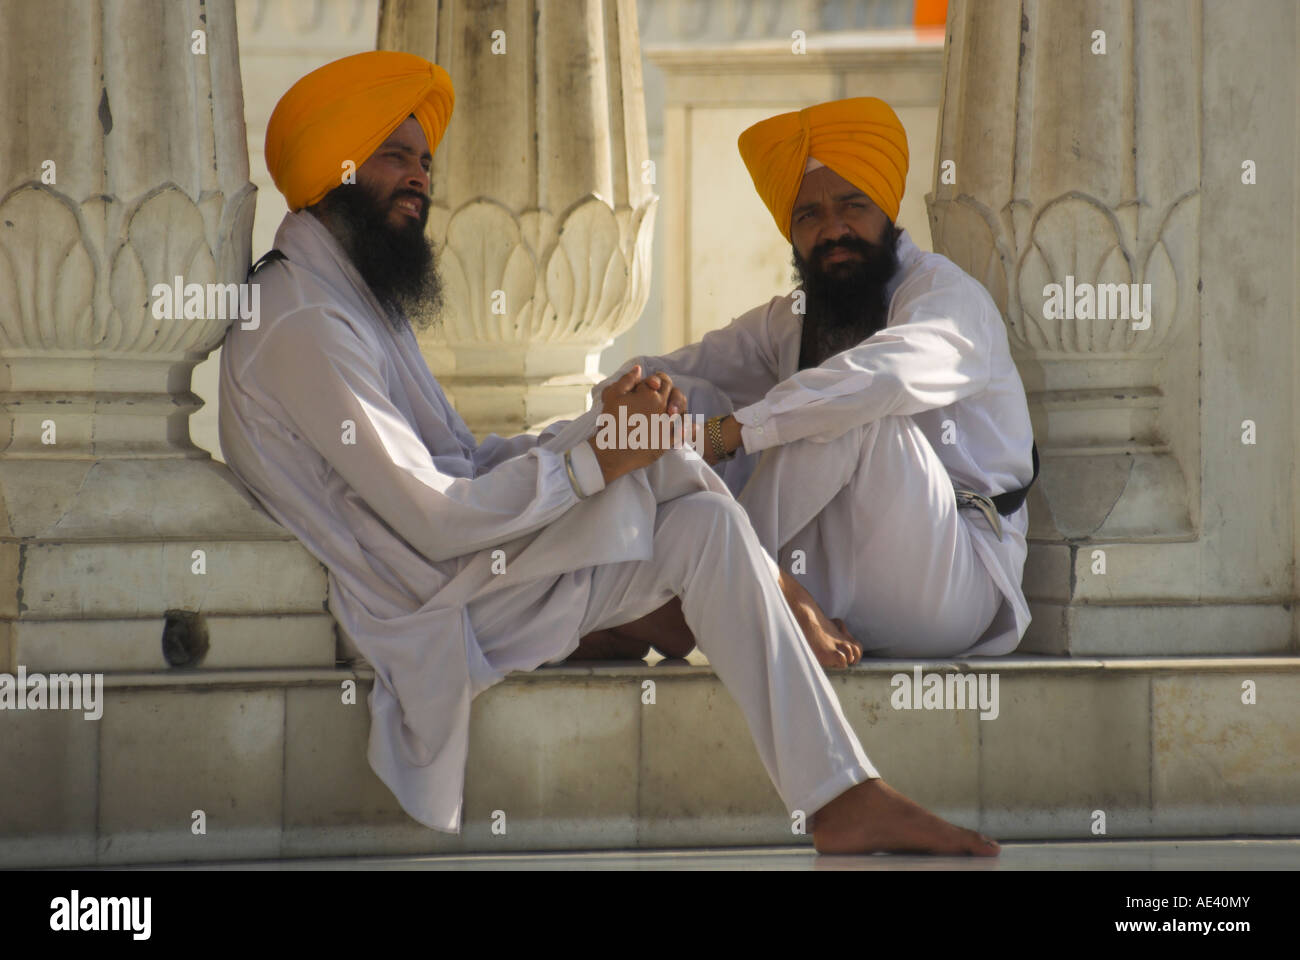 Two Sikhs priests with orange turbans and white dress sitting under arcades, Golden Temple, Amritsar, Punjab state, India Stock Photo